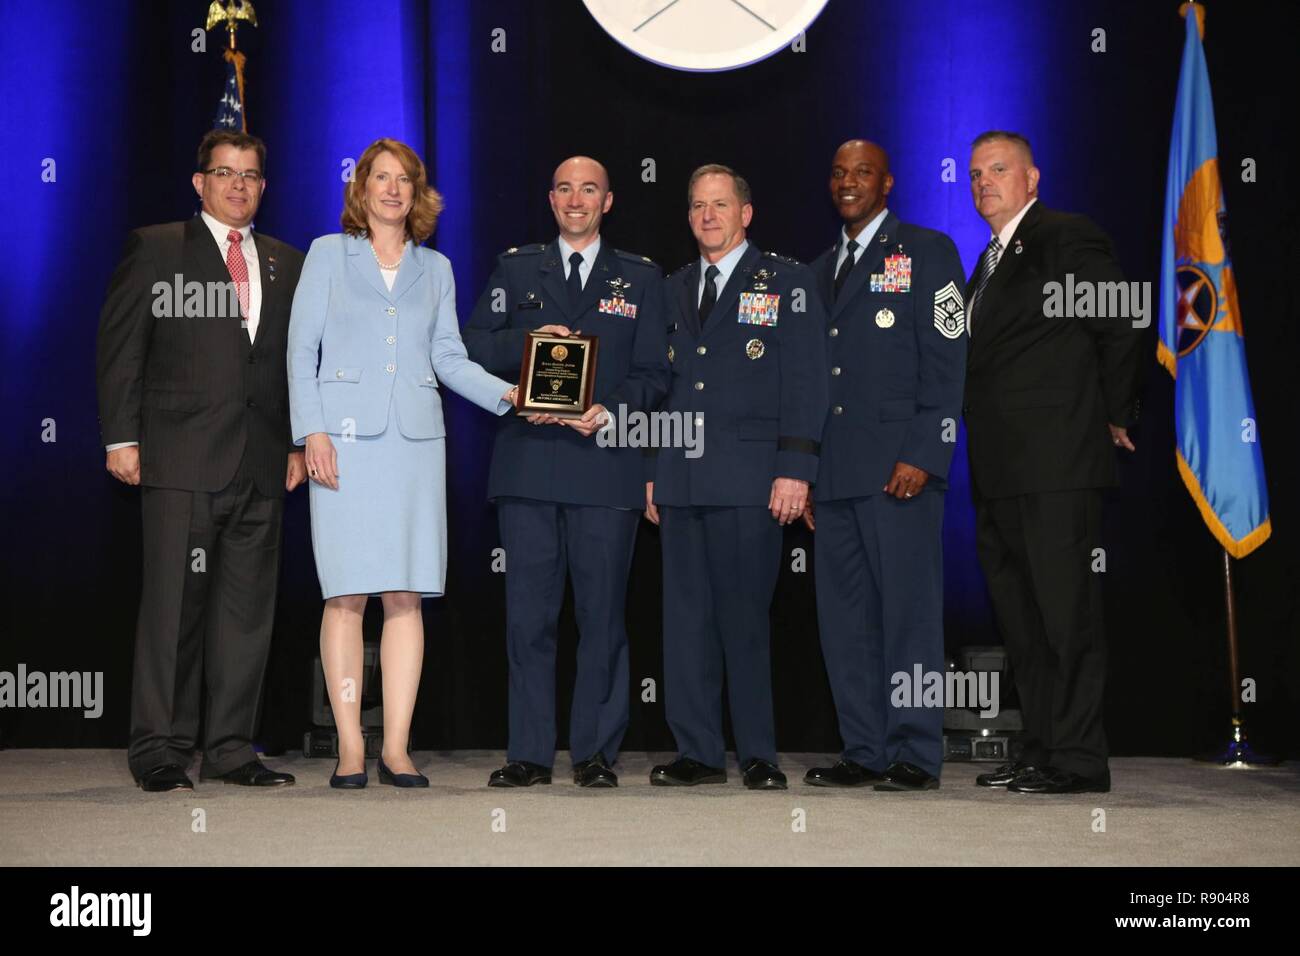 Lt. Col. Scott, former 432nd Operations Support Squadron commander, accepts the inaugural Jimmy Doolittle Educational Fellow for Outstanding Support to Armed UAVs March 2, 2017, at the Martin H. Harris Chapter of the Air Force Association Air Force Gala banquet in Orlando, Florida. Acting Secretary of the Air Force, Lisa Disbrow, presented the award alongside, from left, Air Force Gala Chairman Michael Liquori, Chief of Staff of the Air Force Gen. David Goldfein, Chief Master Sgt. of the Air Force Kaleth Wright and Martin H. Harris Chapter President Gary Lehmann. Stock Photo